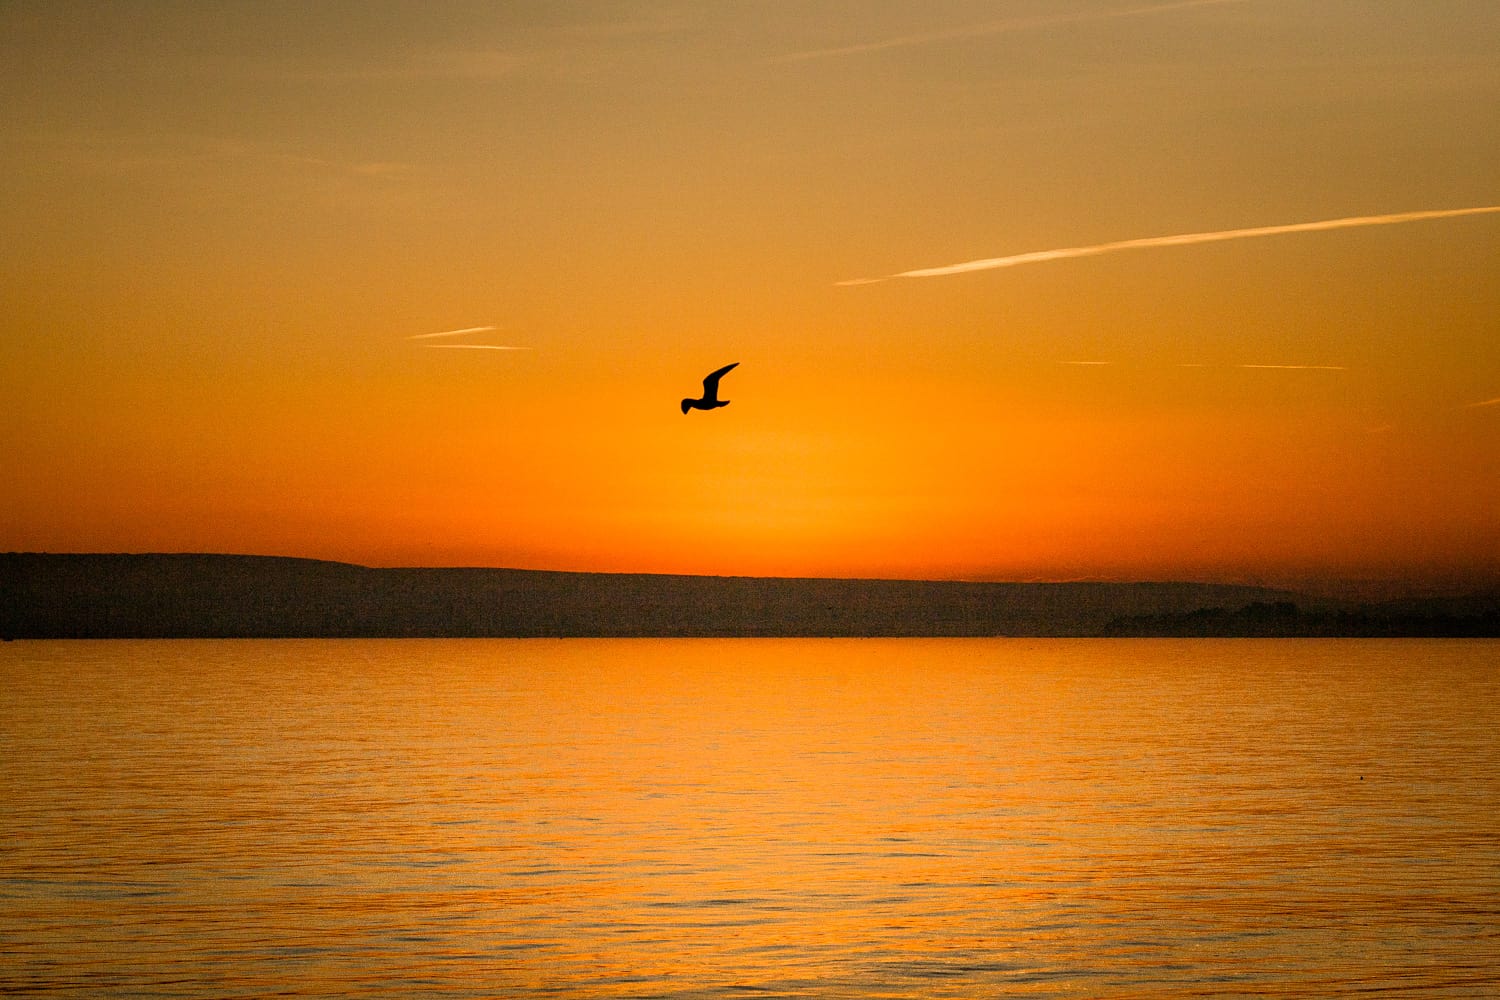  A solitary bird illuminated by the sunset photographed from Bournemouth Beach 